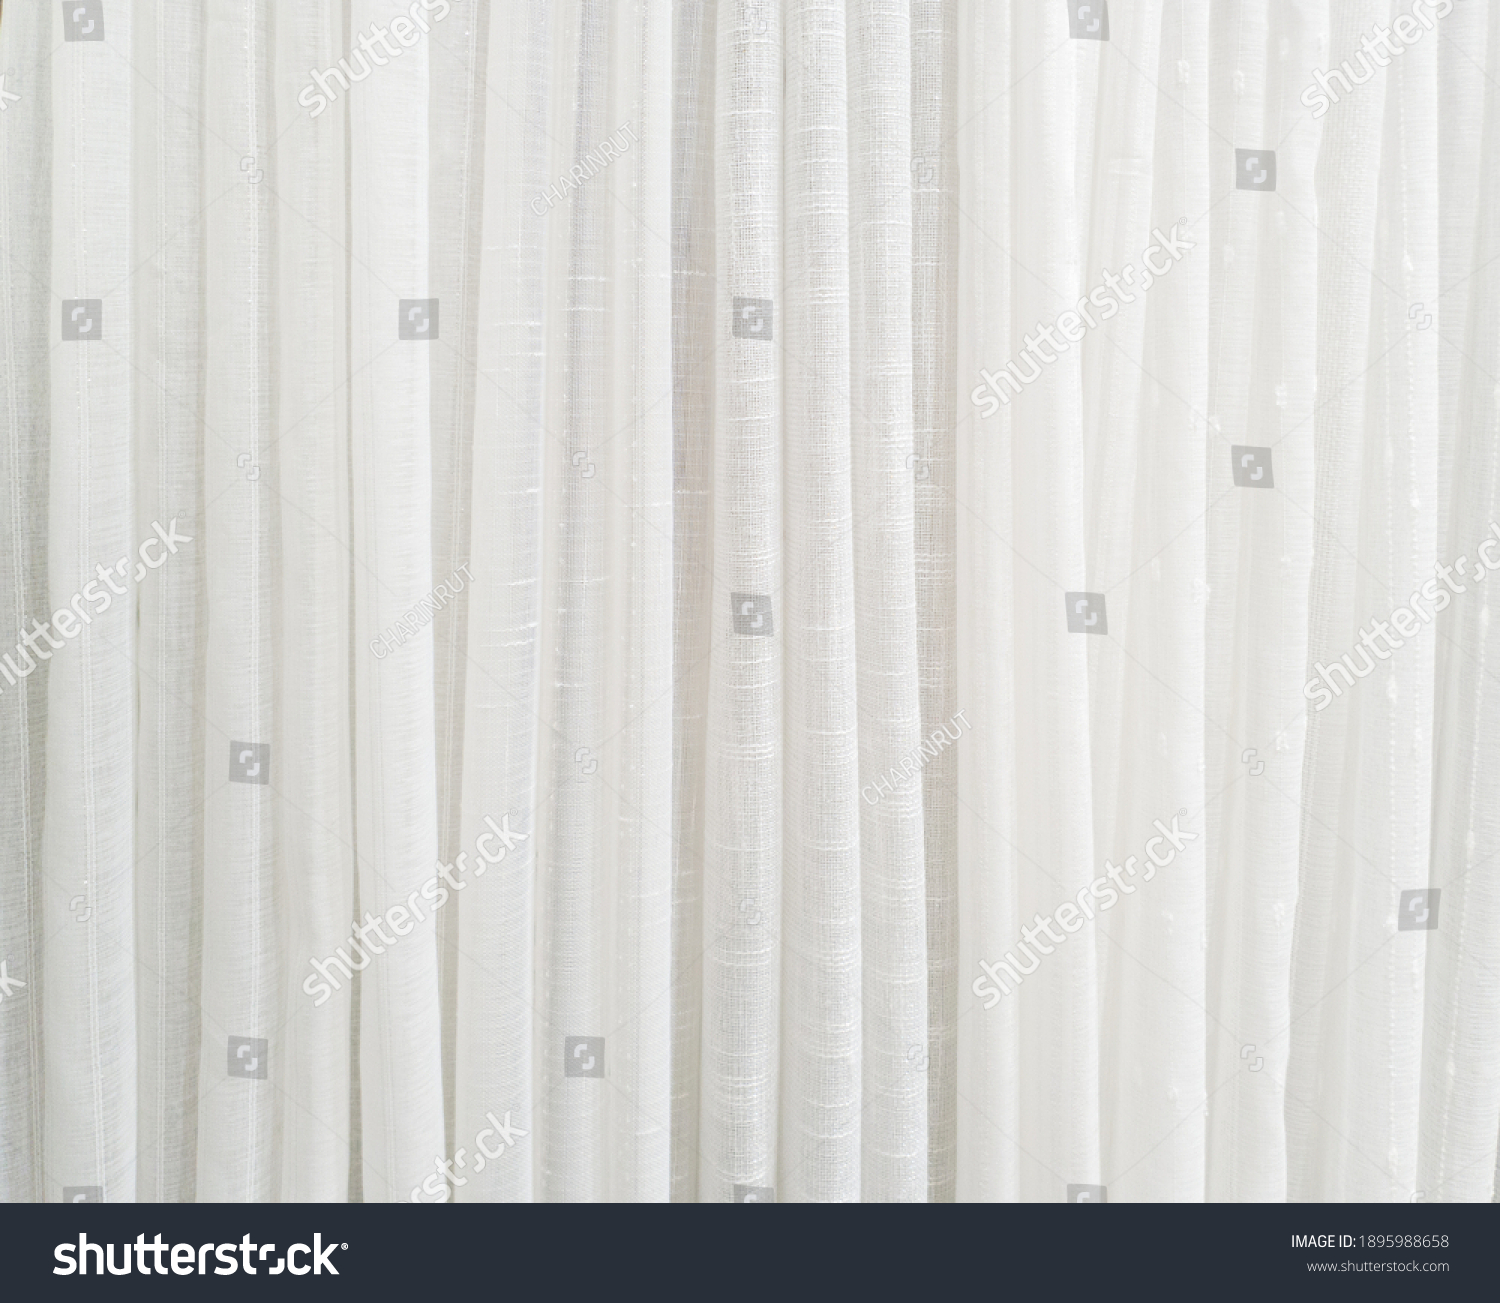 Texture Curtains Sheer Fabric Sunlight Can Stock Photo 1895988658 ...